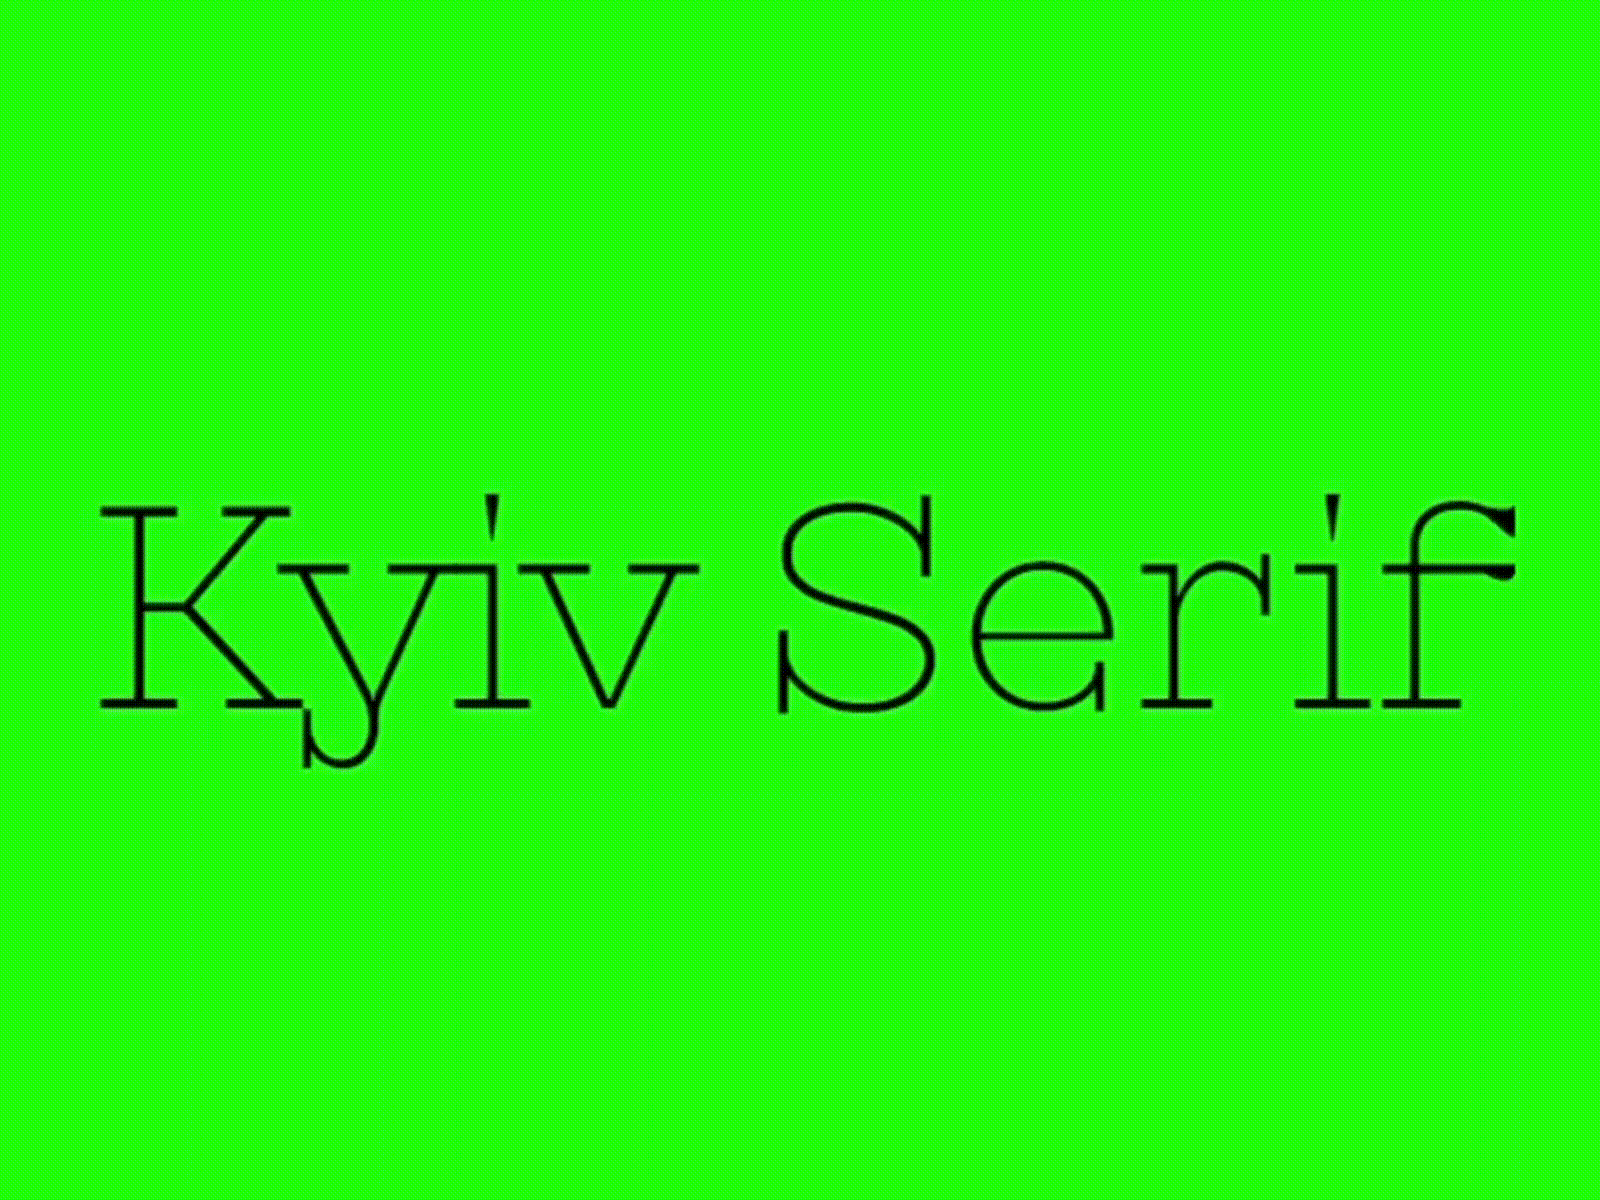 Kyiv font. Variable and free new font for Kyiv. font font design free kiev kyiv kyivfont type variable